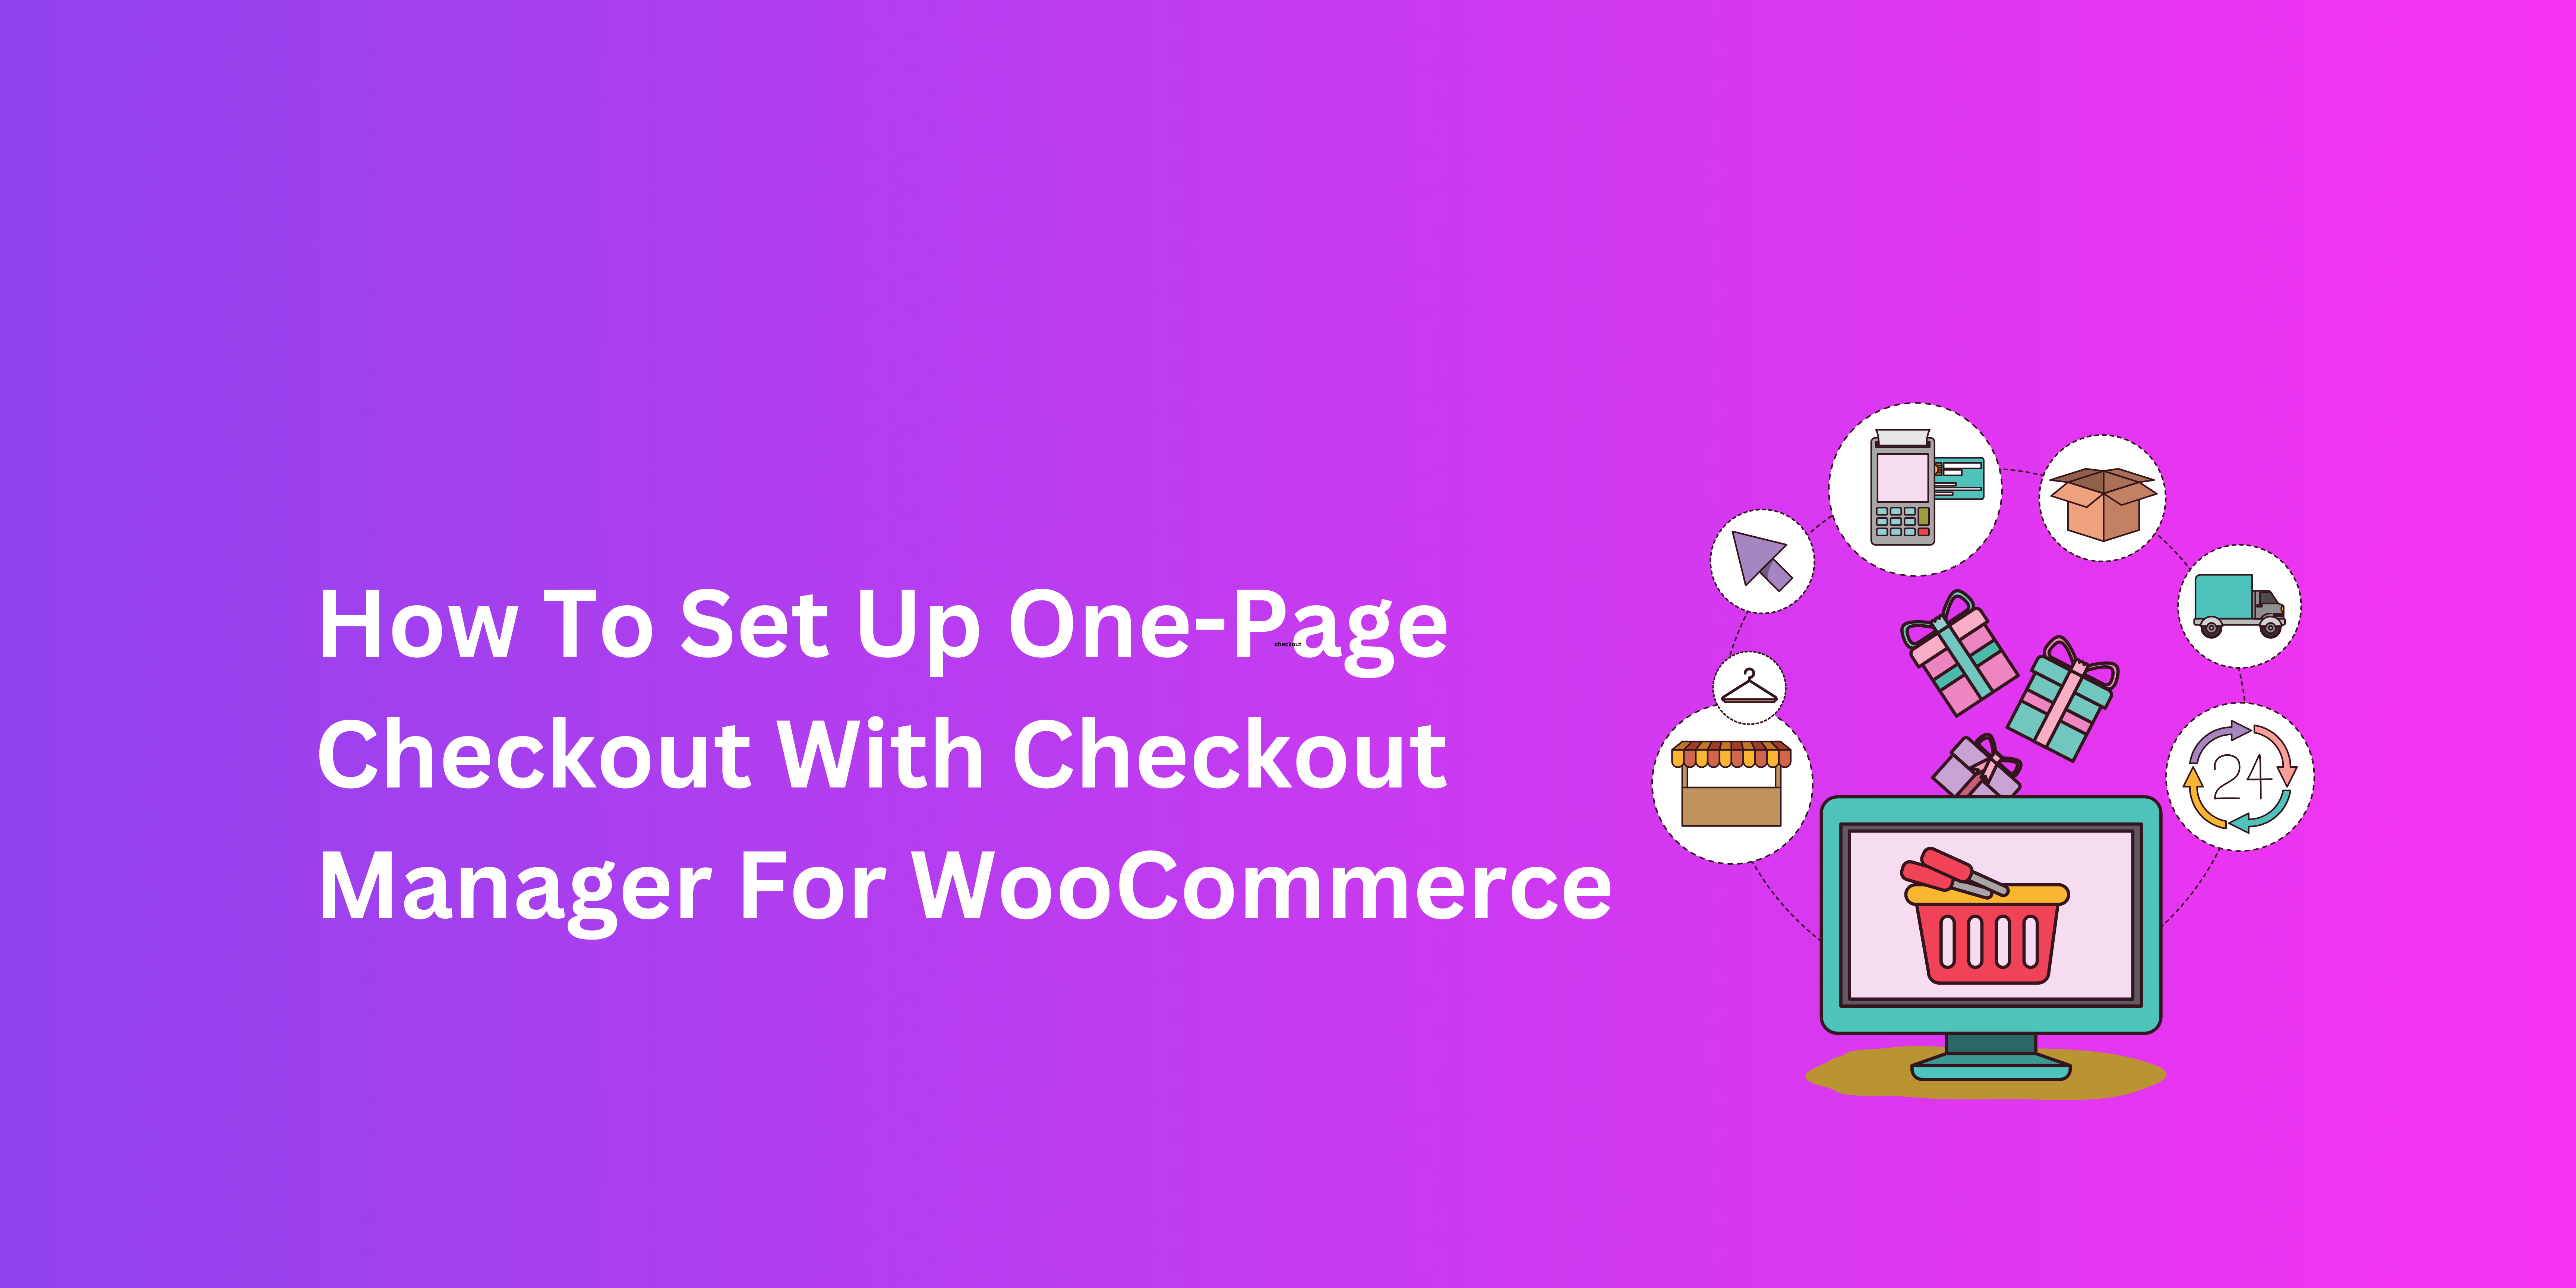 one-page checkout with checkout manger for woocommerce